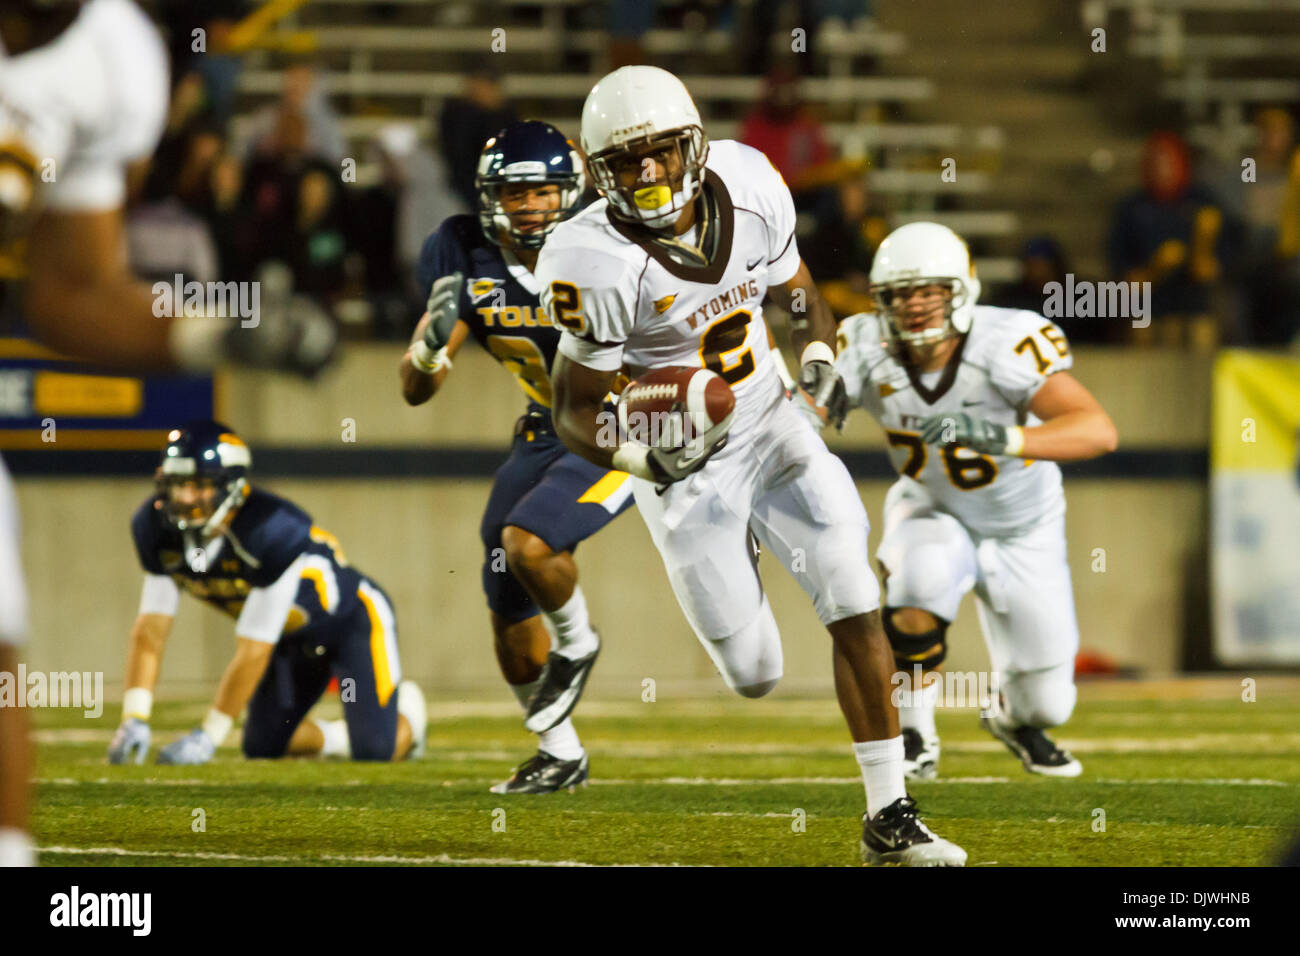 Oct. 4, 2010 - Toledo, Ohio, United States of America - Wyoming wide receiver Mazi Ogbonna (#2) carries the ball during game action.  Wyoming defeated Toledo 20-15 at the Glass Bowl. (Credit Image: © Scott Grau/Southcreek Global/ZUMApress.com) Stock Photo